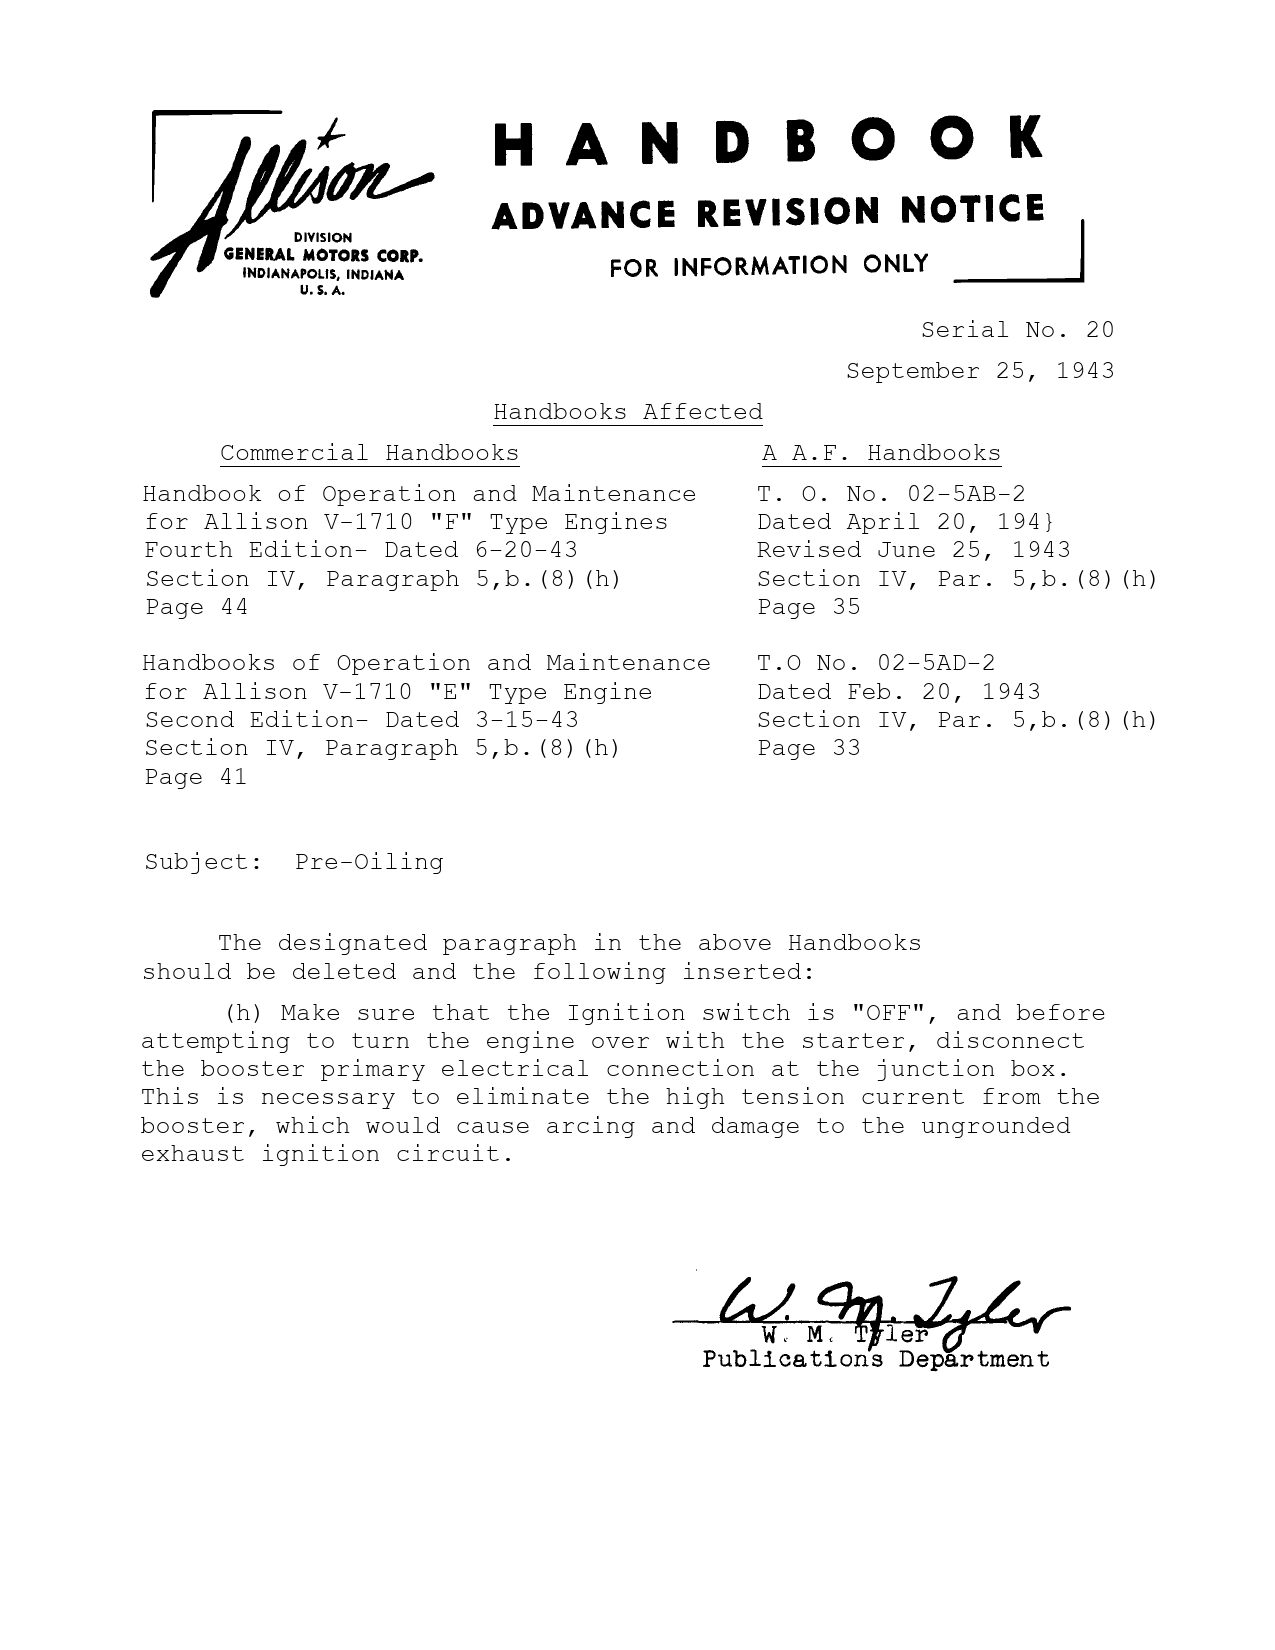 Sample page 1 from AirCorps Library document: Pre-Oiling